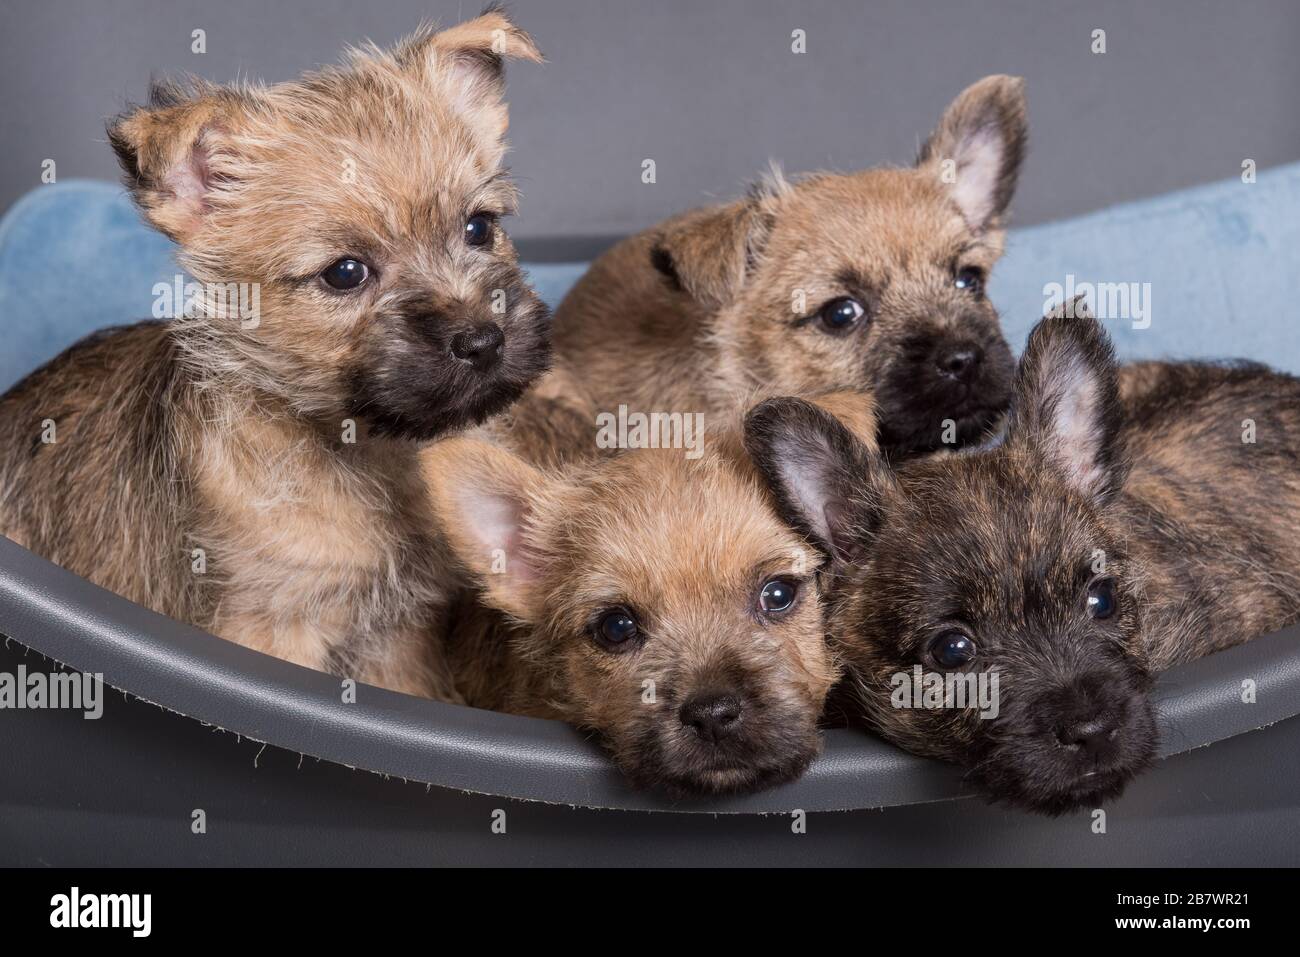 Four Cairn Terrier puppies dogs kennel in dog bed Stock Photo - Alamy